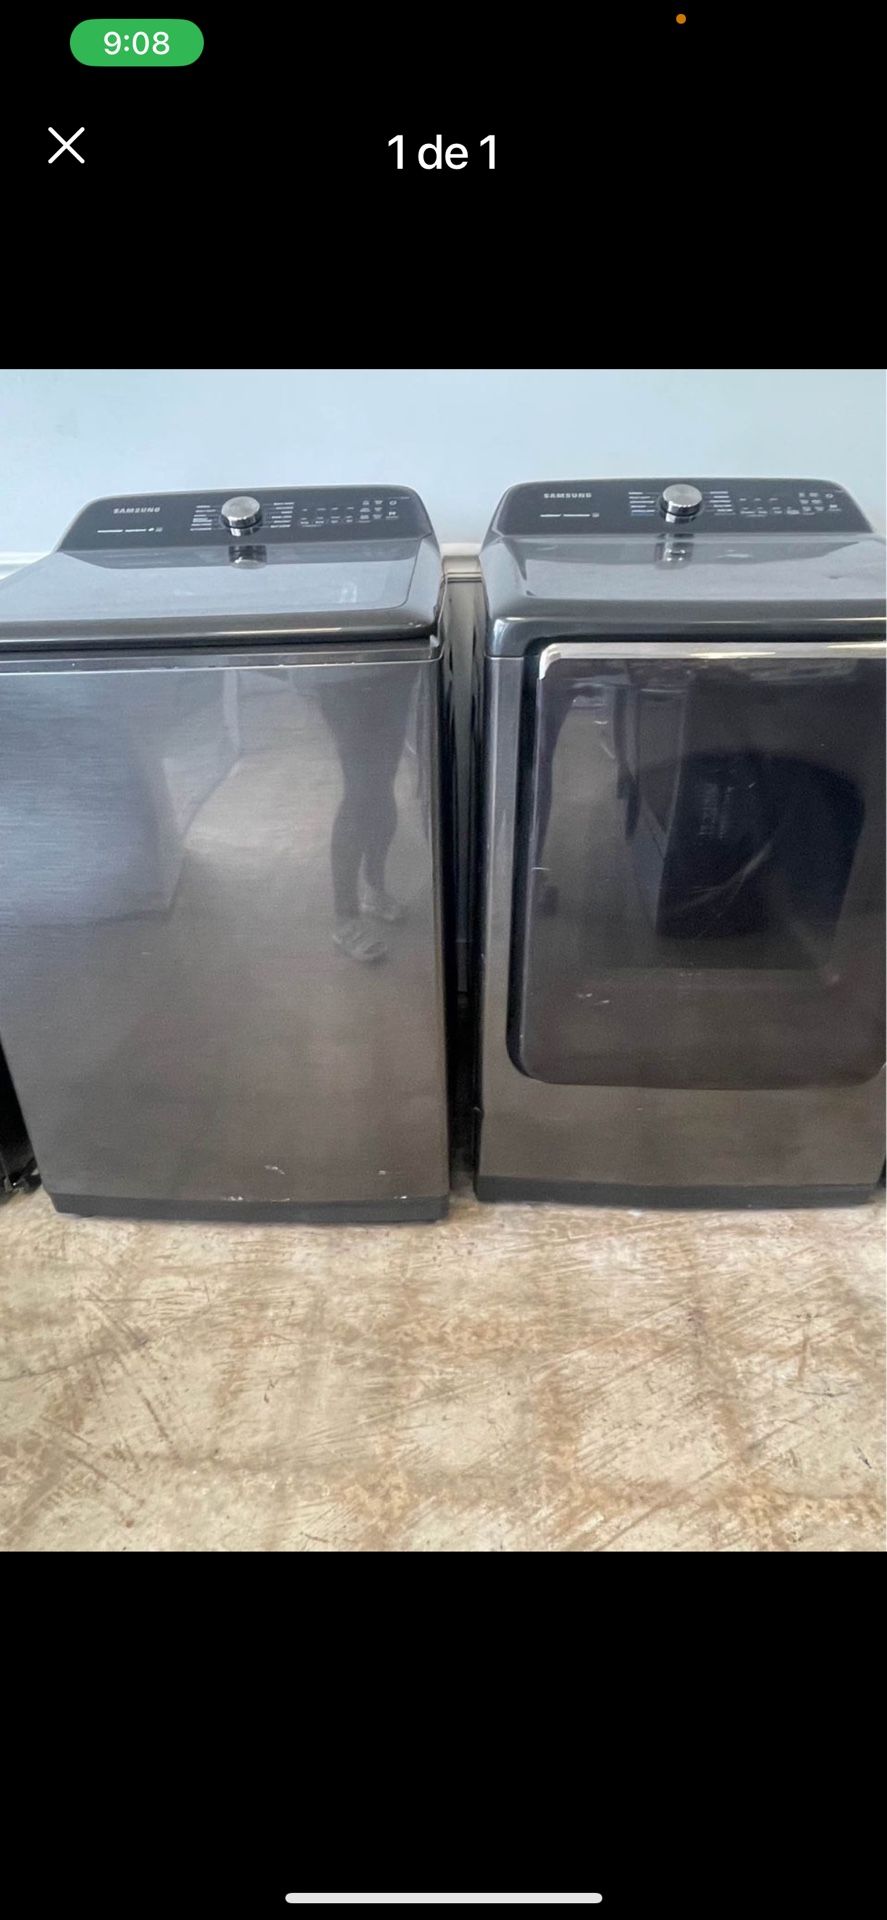 Samsung Washer And Dryer Set Stainless Steel 